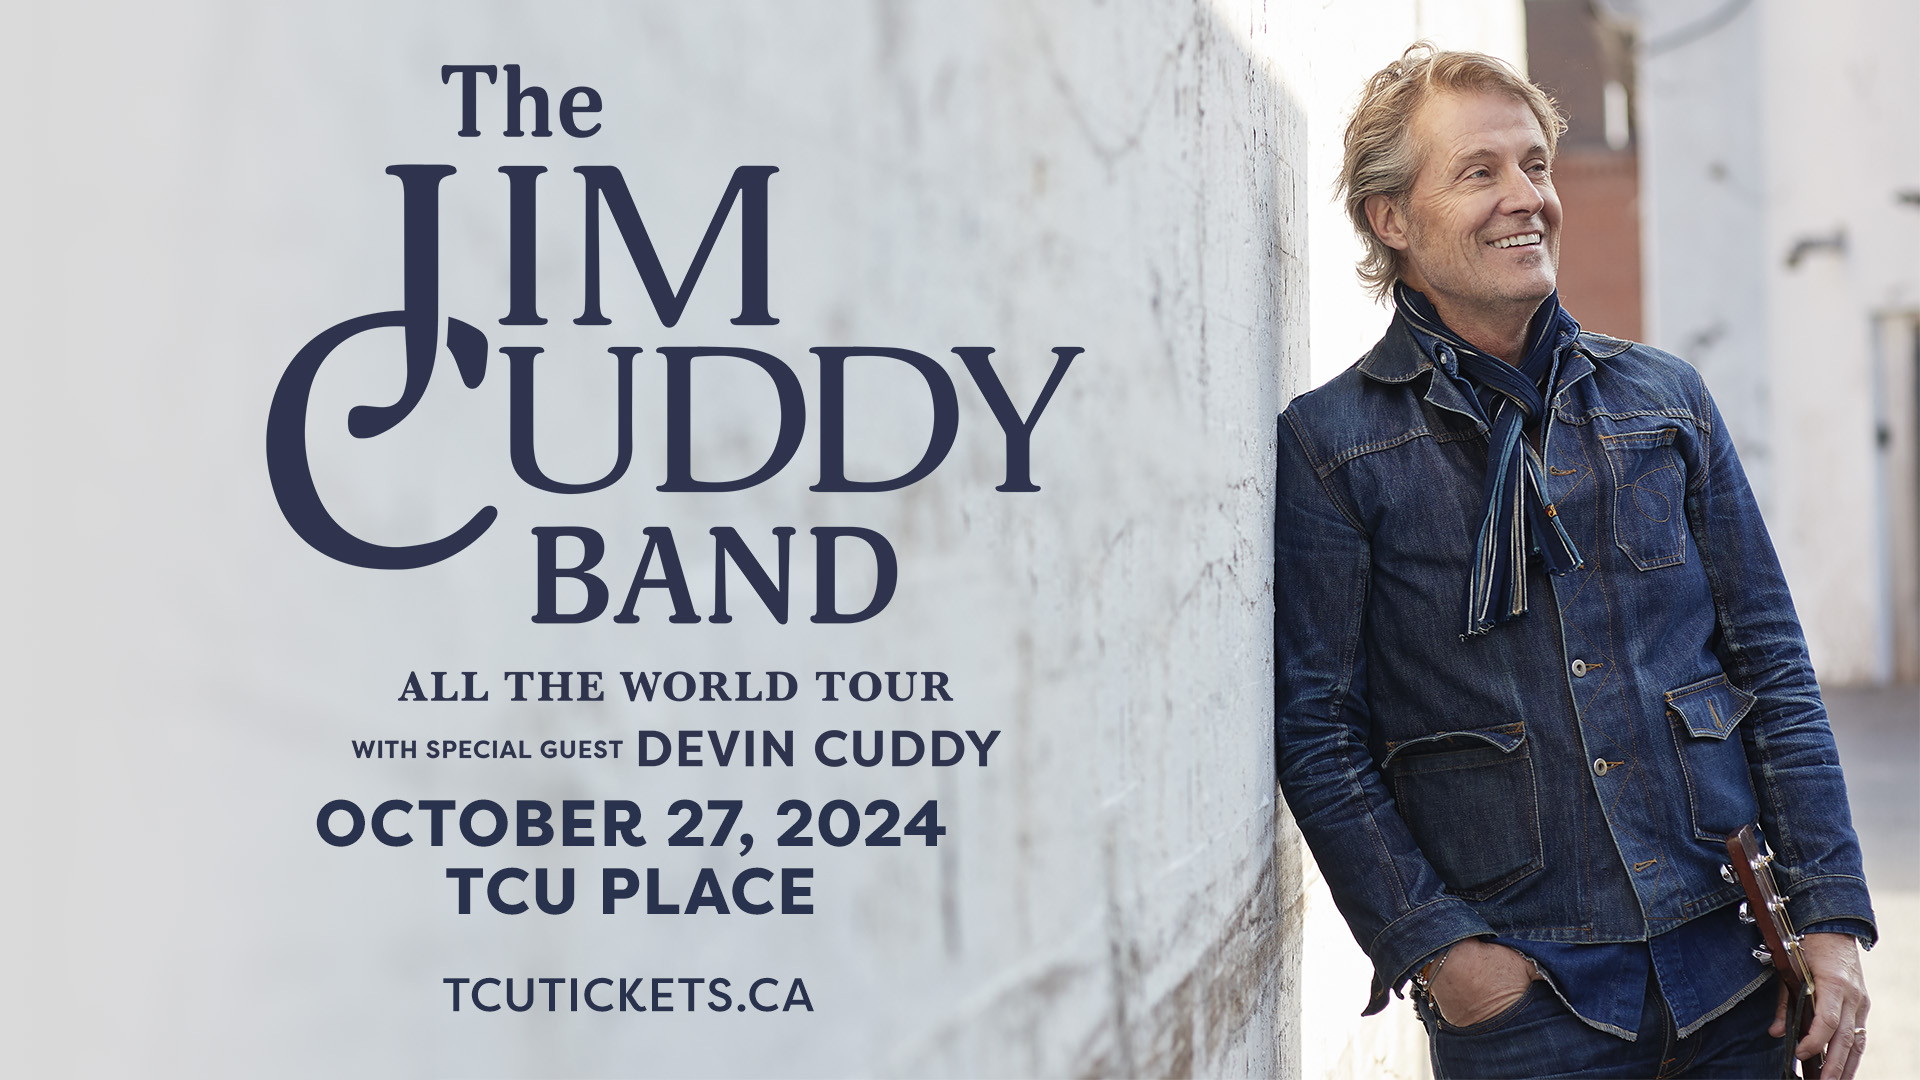 The Jim Cuddy Band - All The World Tour with special guest Devin Cuddy